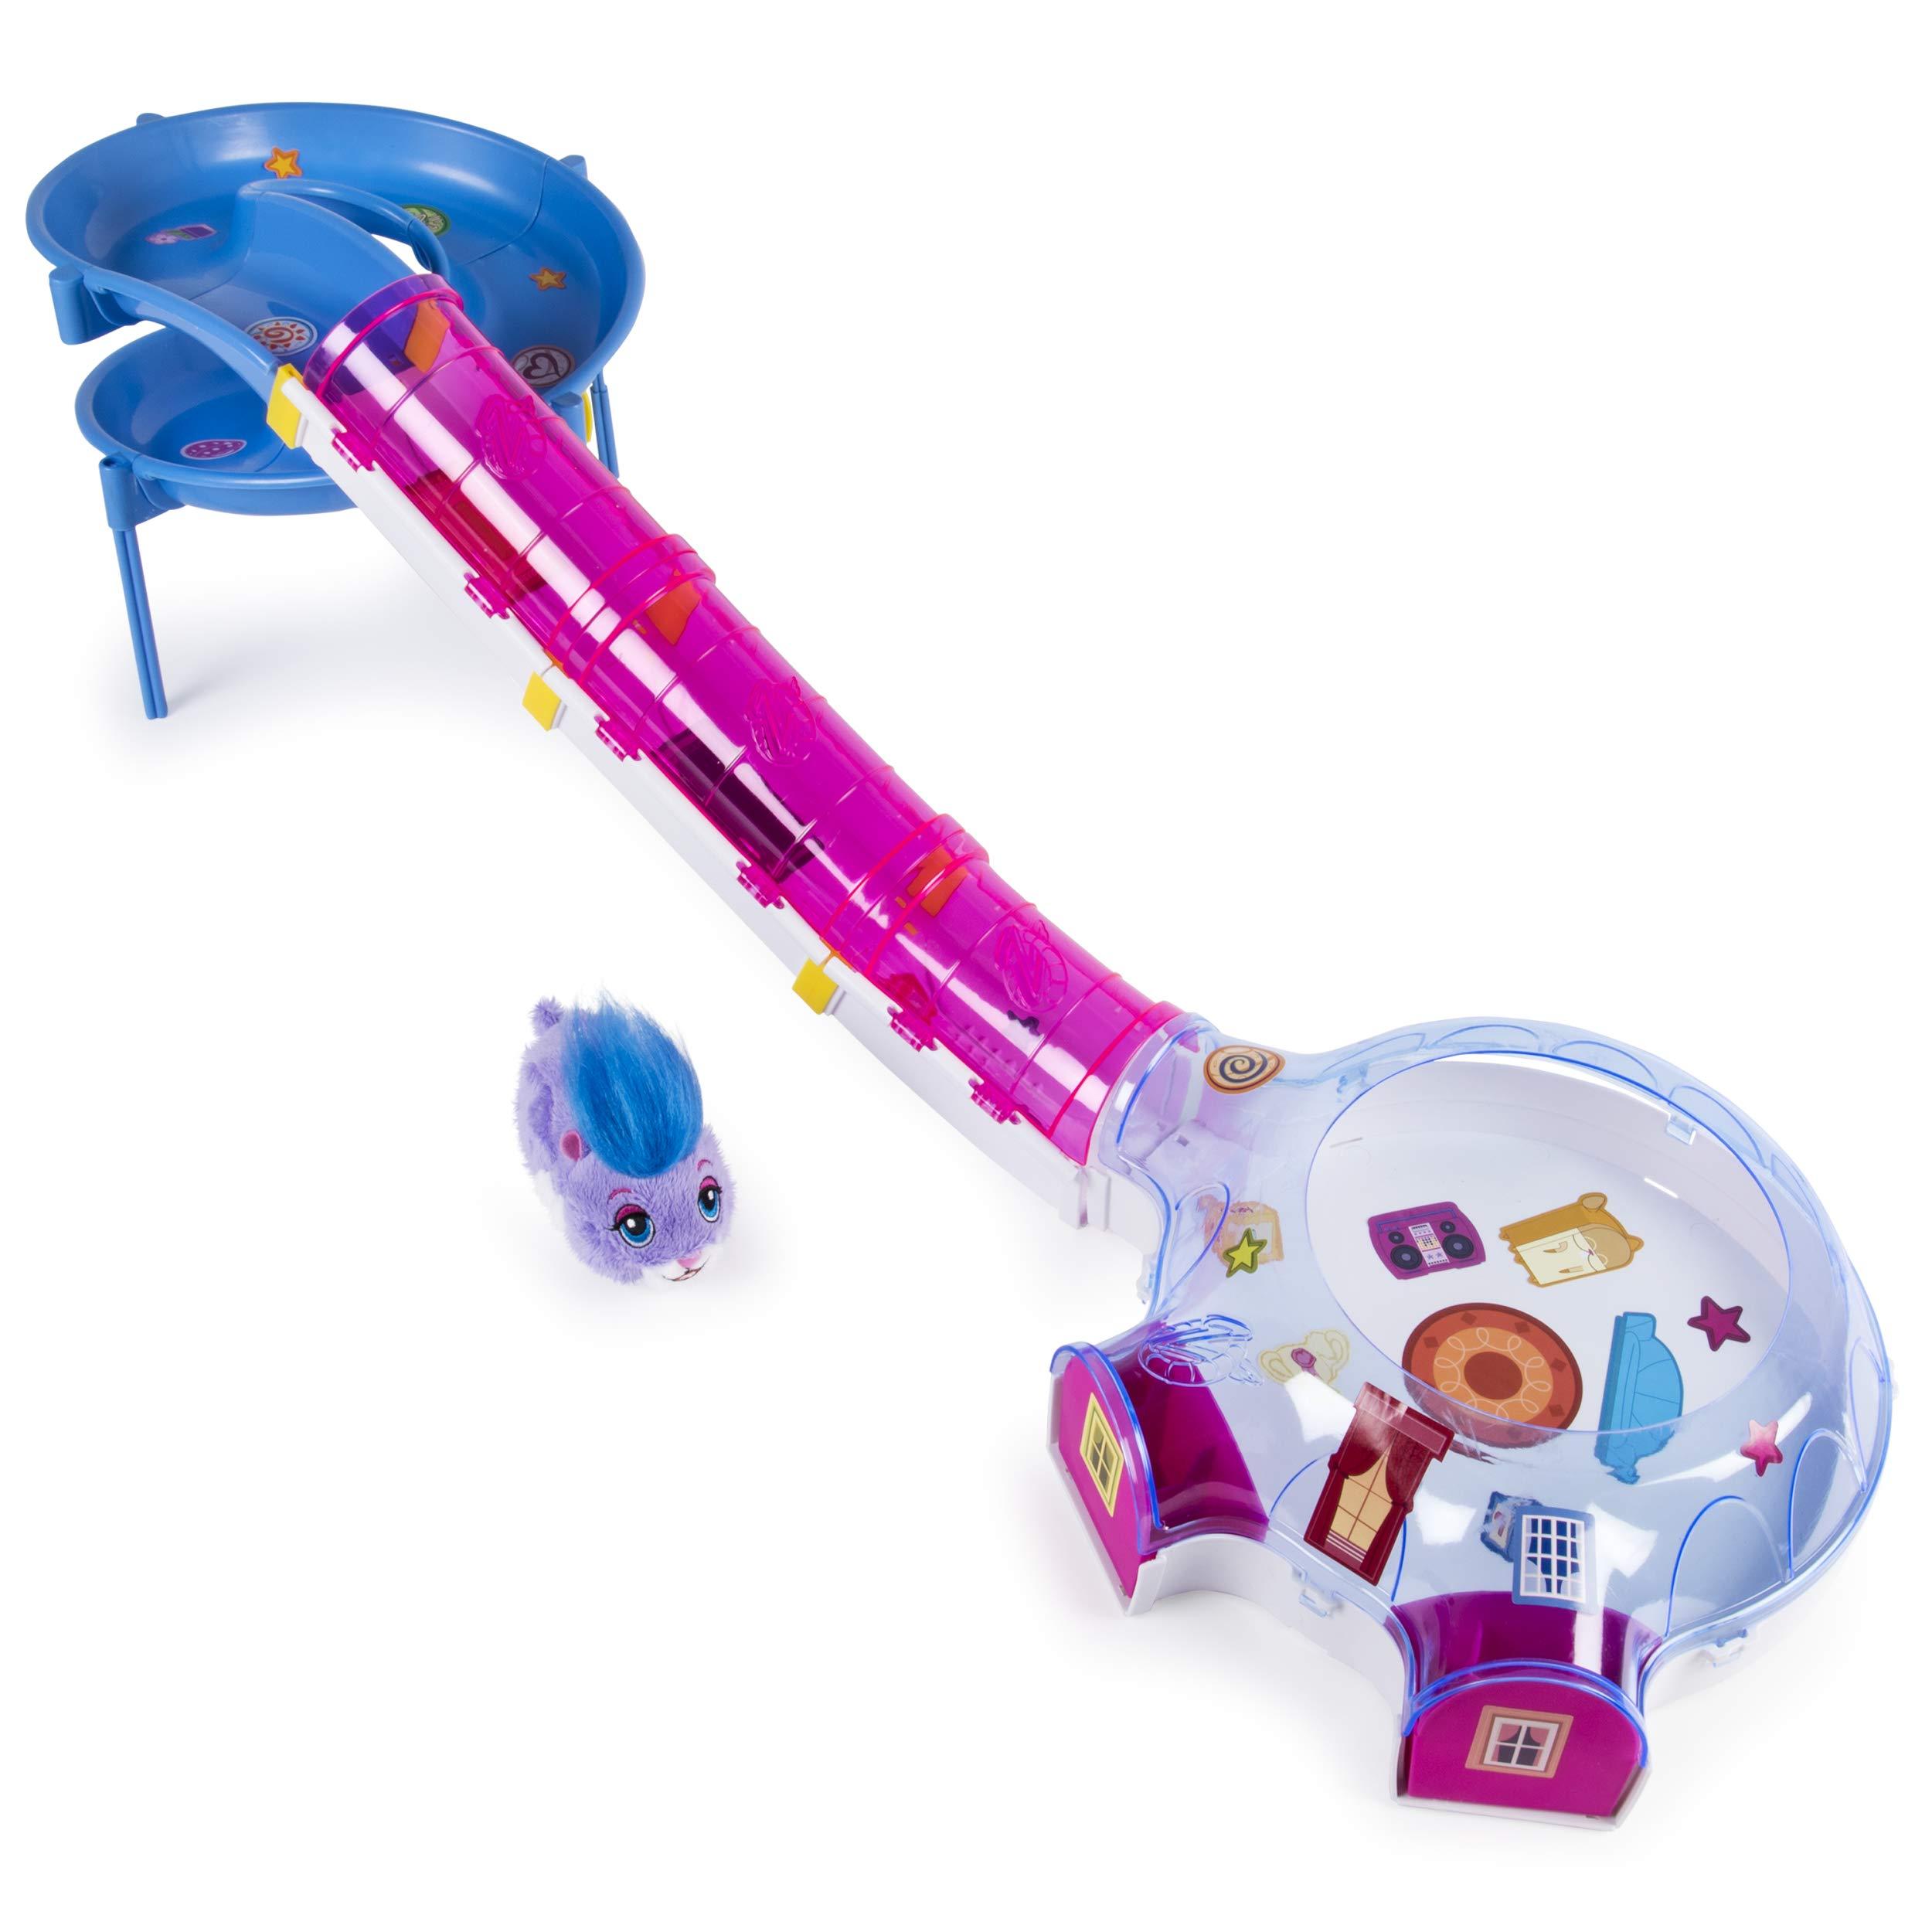 Zhu Zhu Pets – Hamster House Play Set with Slide and Tunnel - image 3 of 8